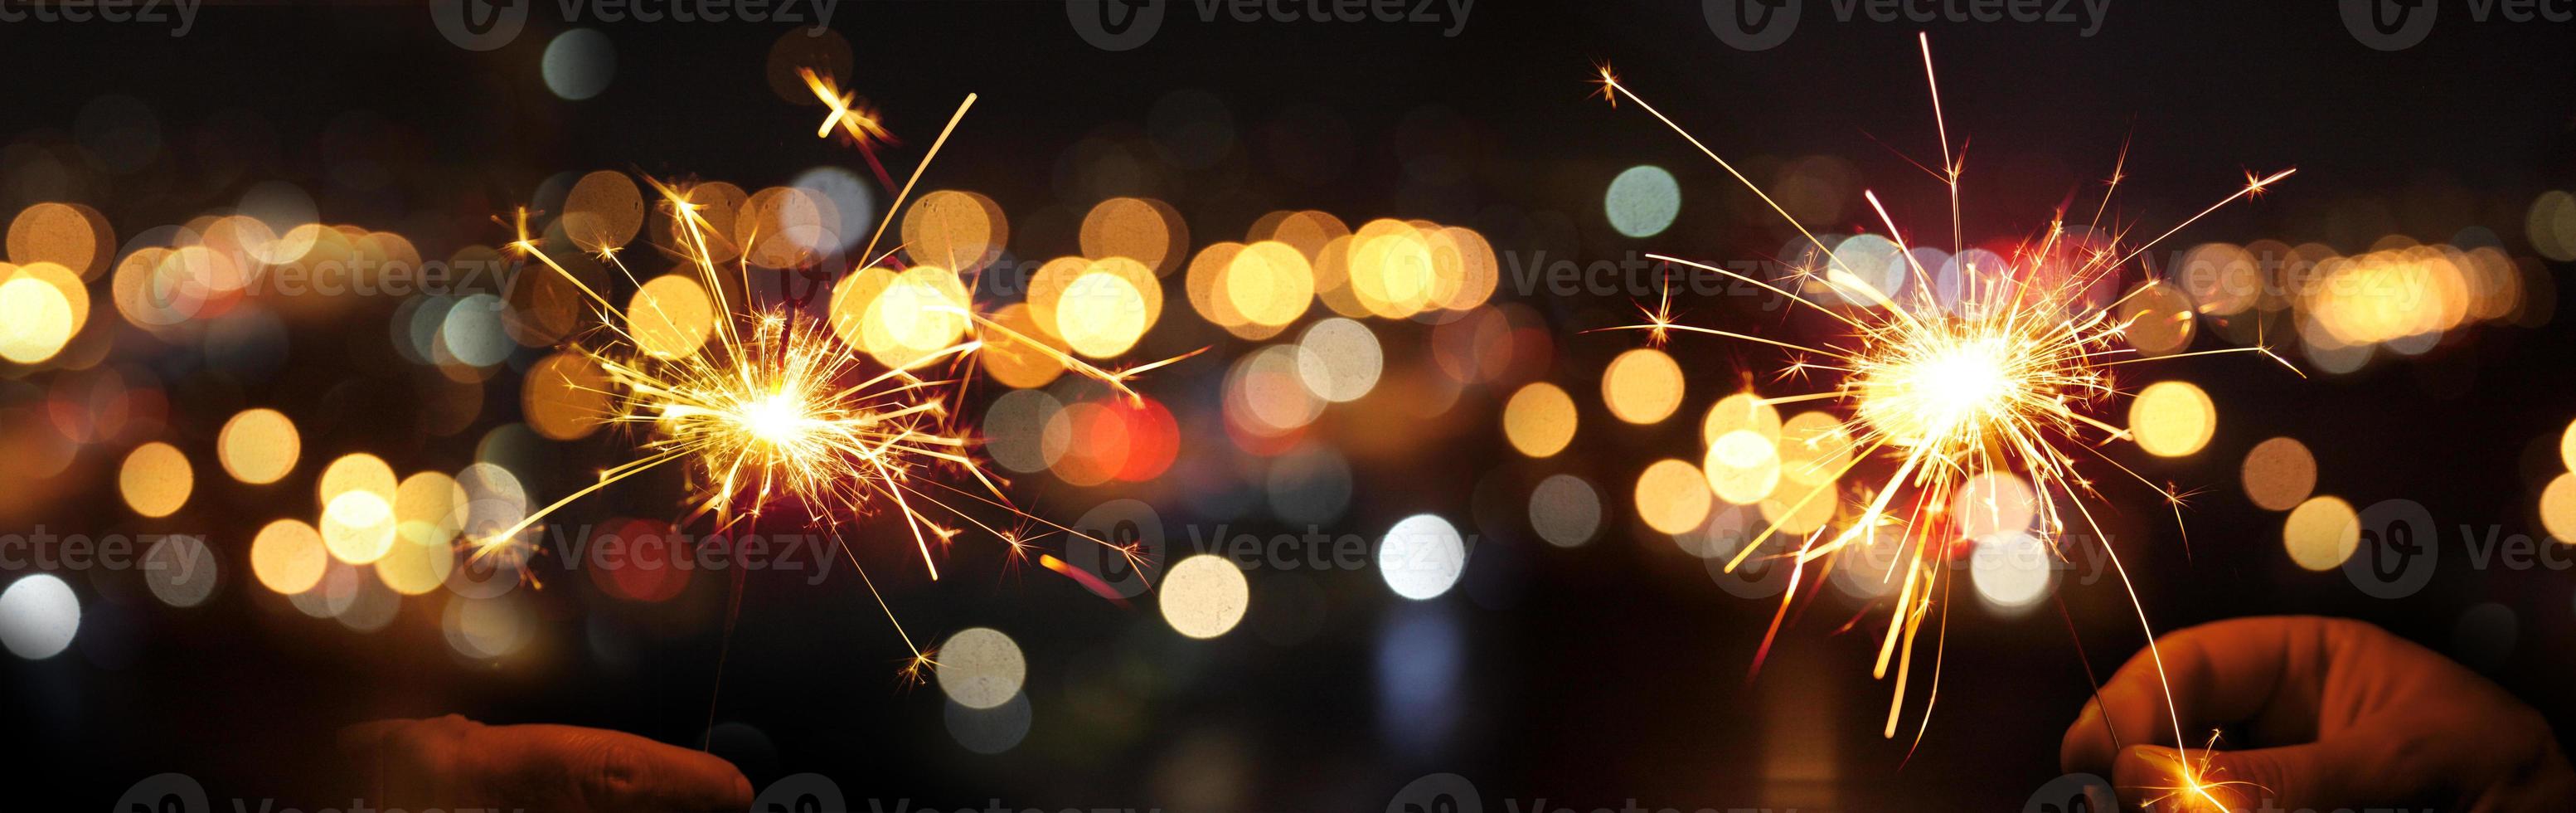 Happy New Year background with glowing sparklers. photo